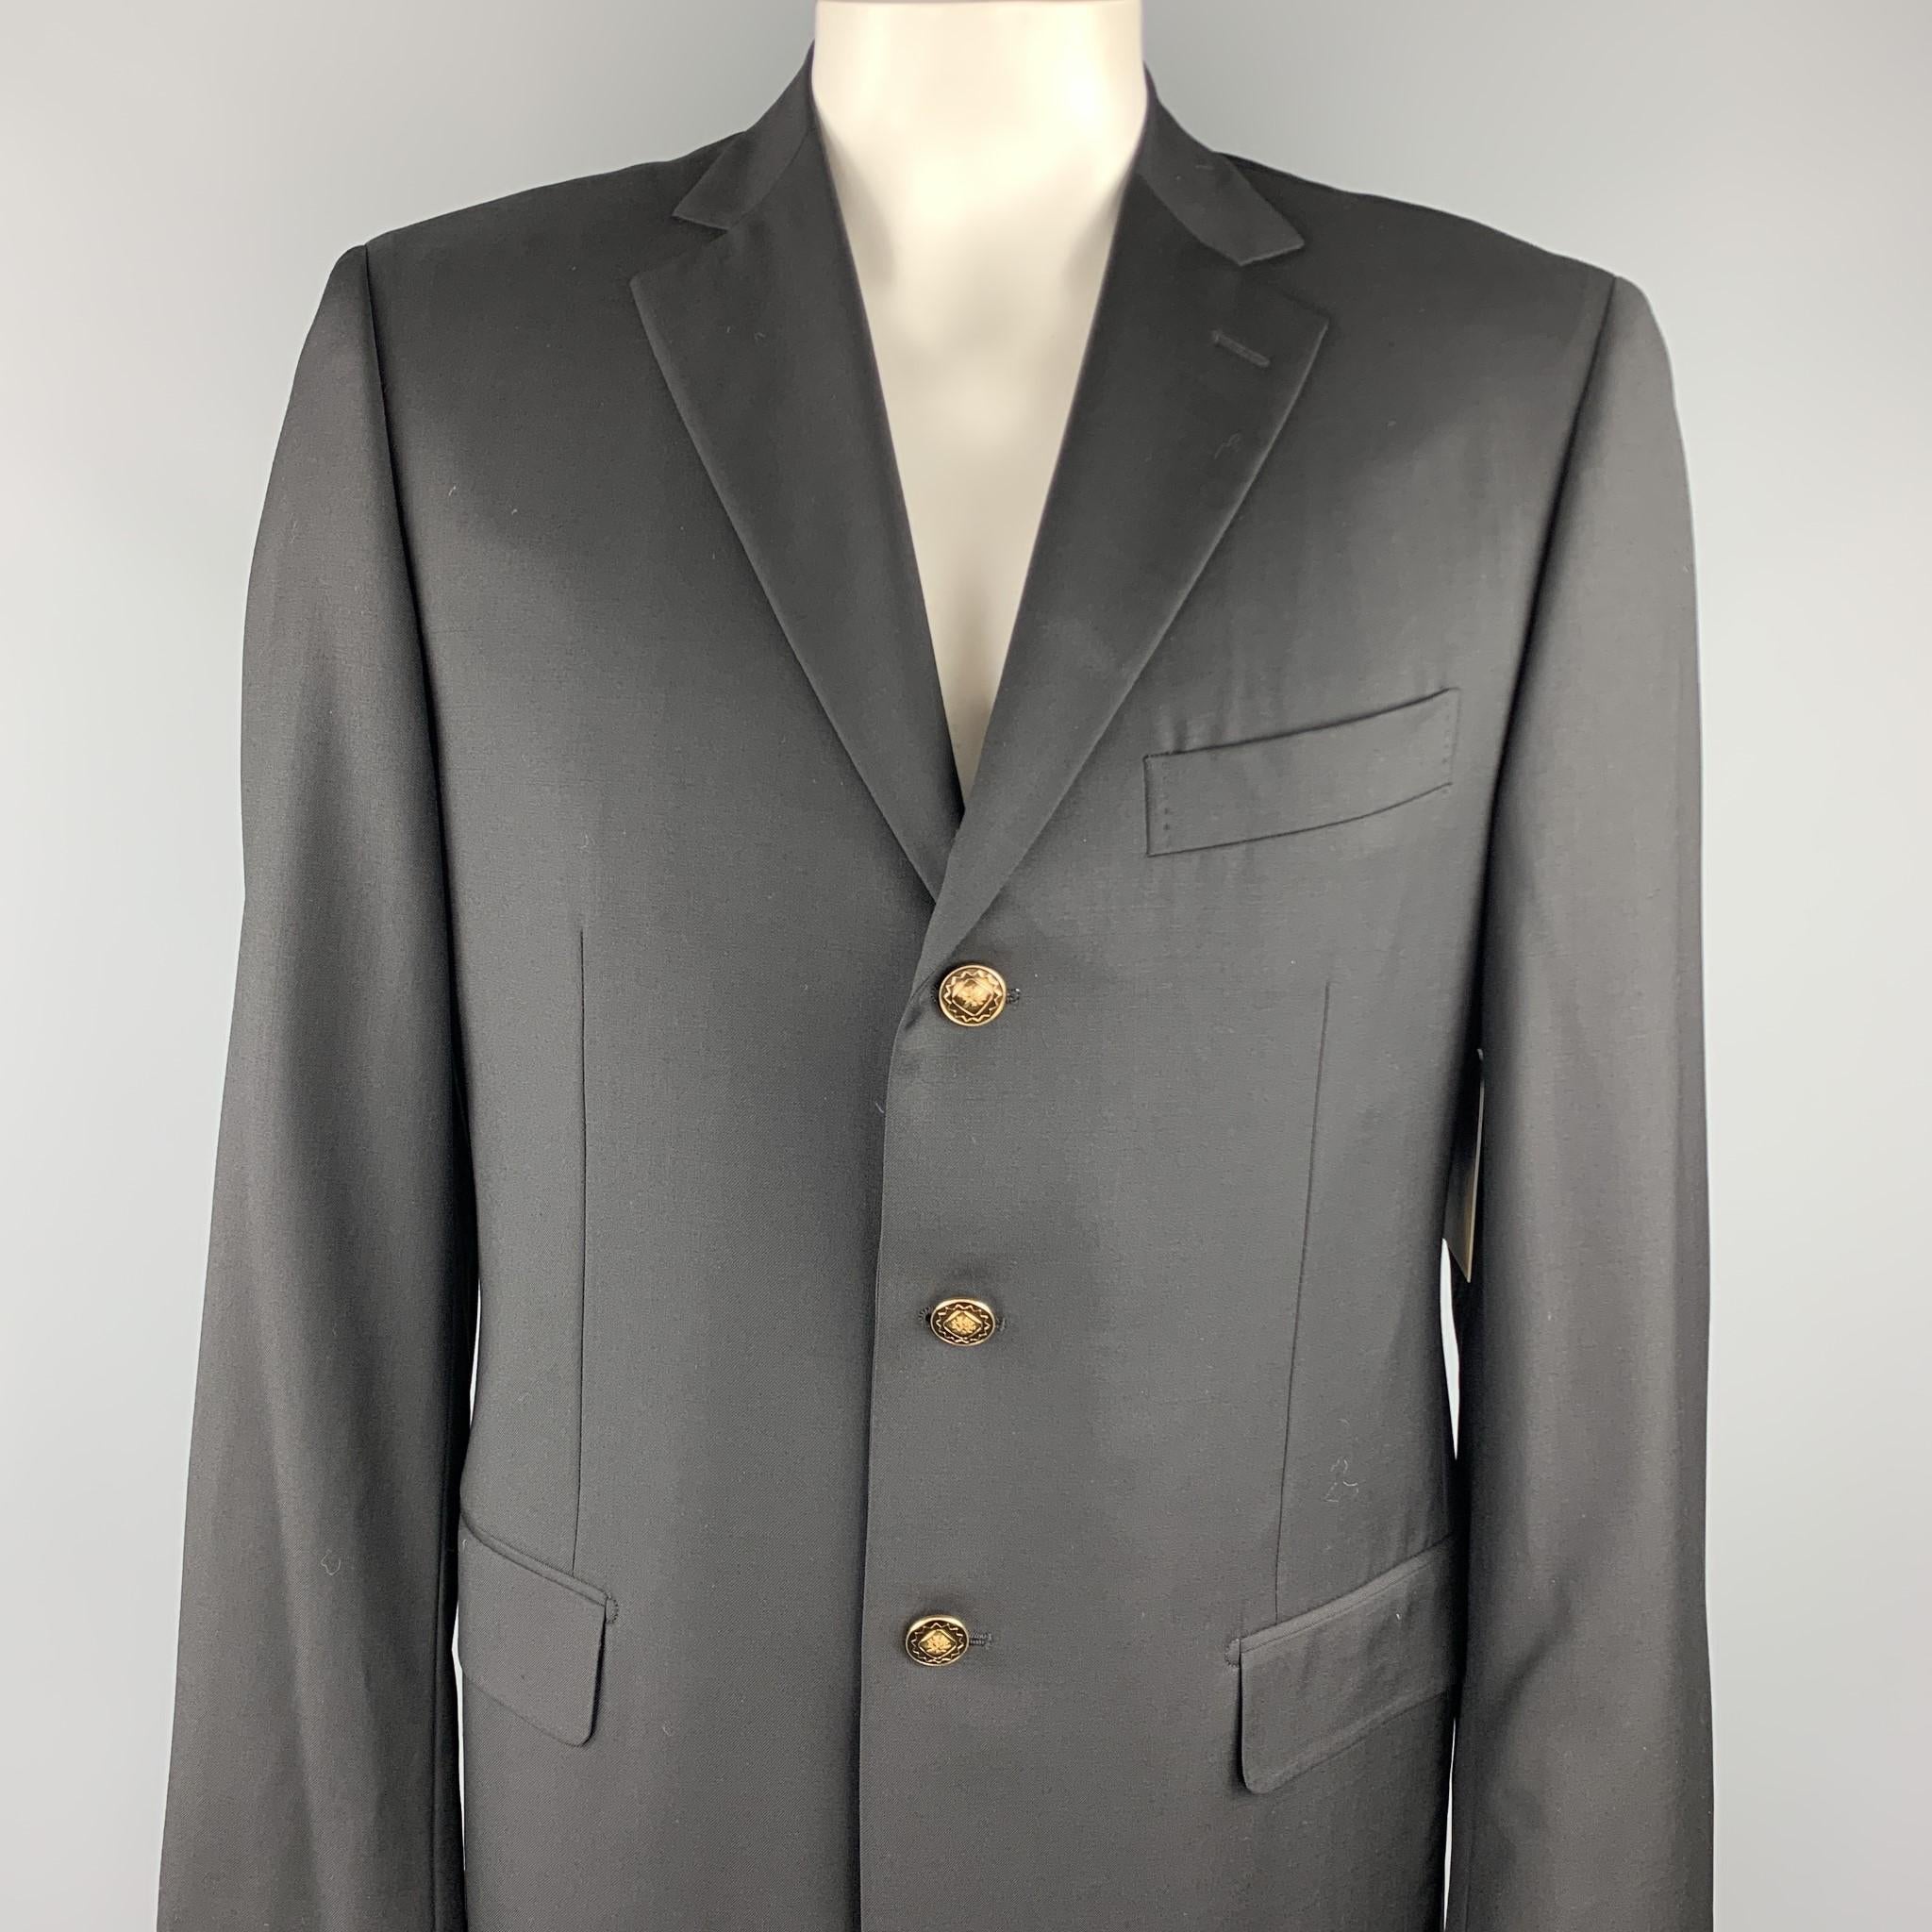 PAL ZILERI sport coat comes in a black wool featuring a notch lapel style, flap pockets, gold tone buttons, and a three button closure. Made in Italy. 

Excellent Pre-Owned Condition.
Marked: IT 50

Measurements:

Shoulder: 18 in. 
Chest: 42 in.